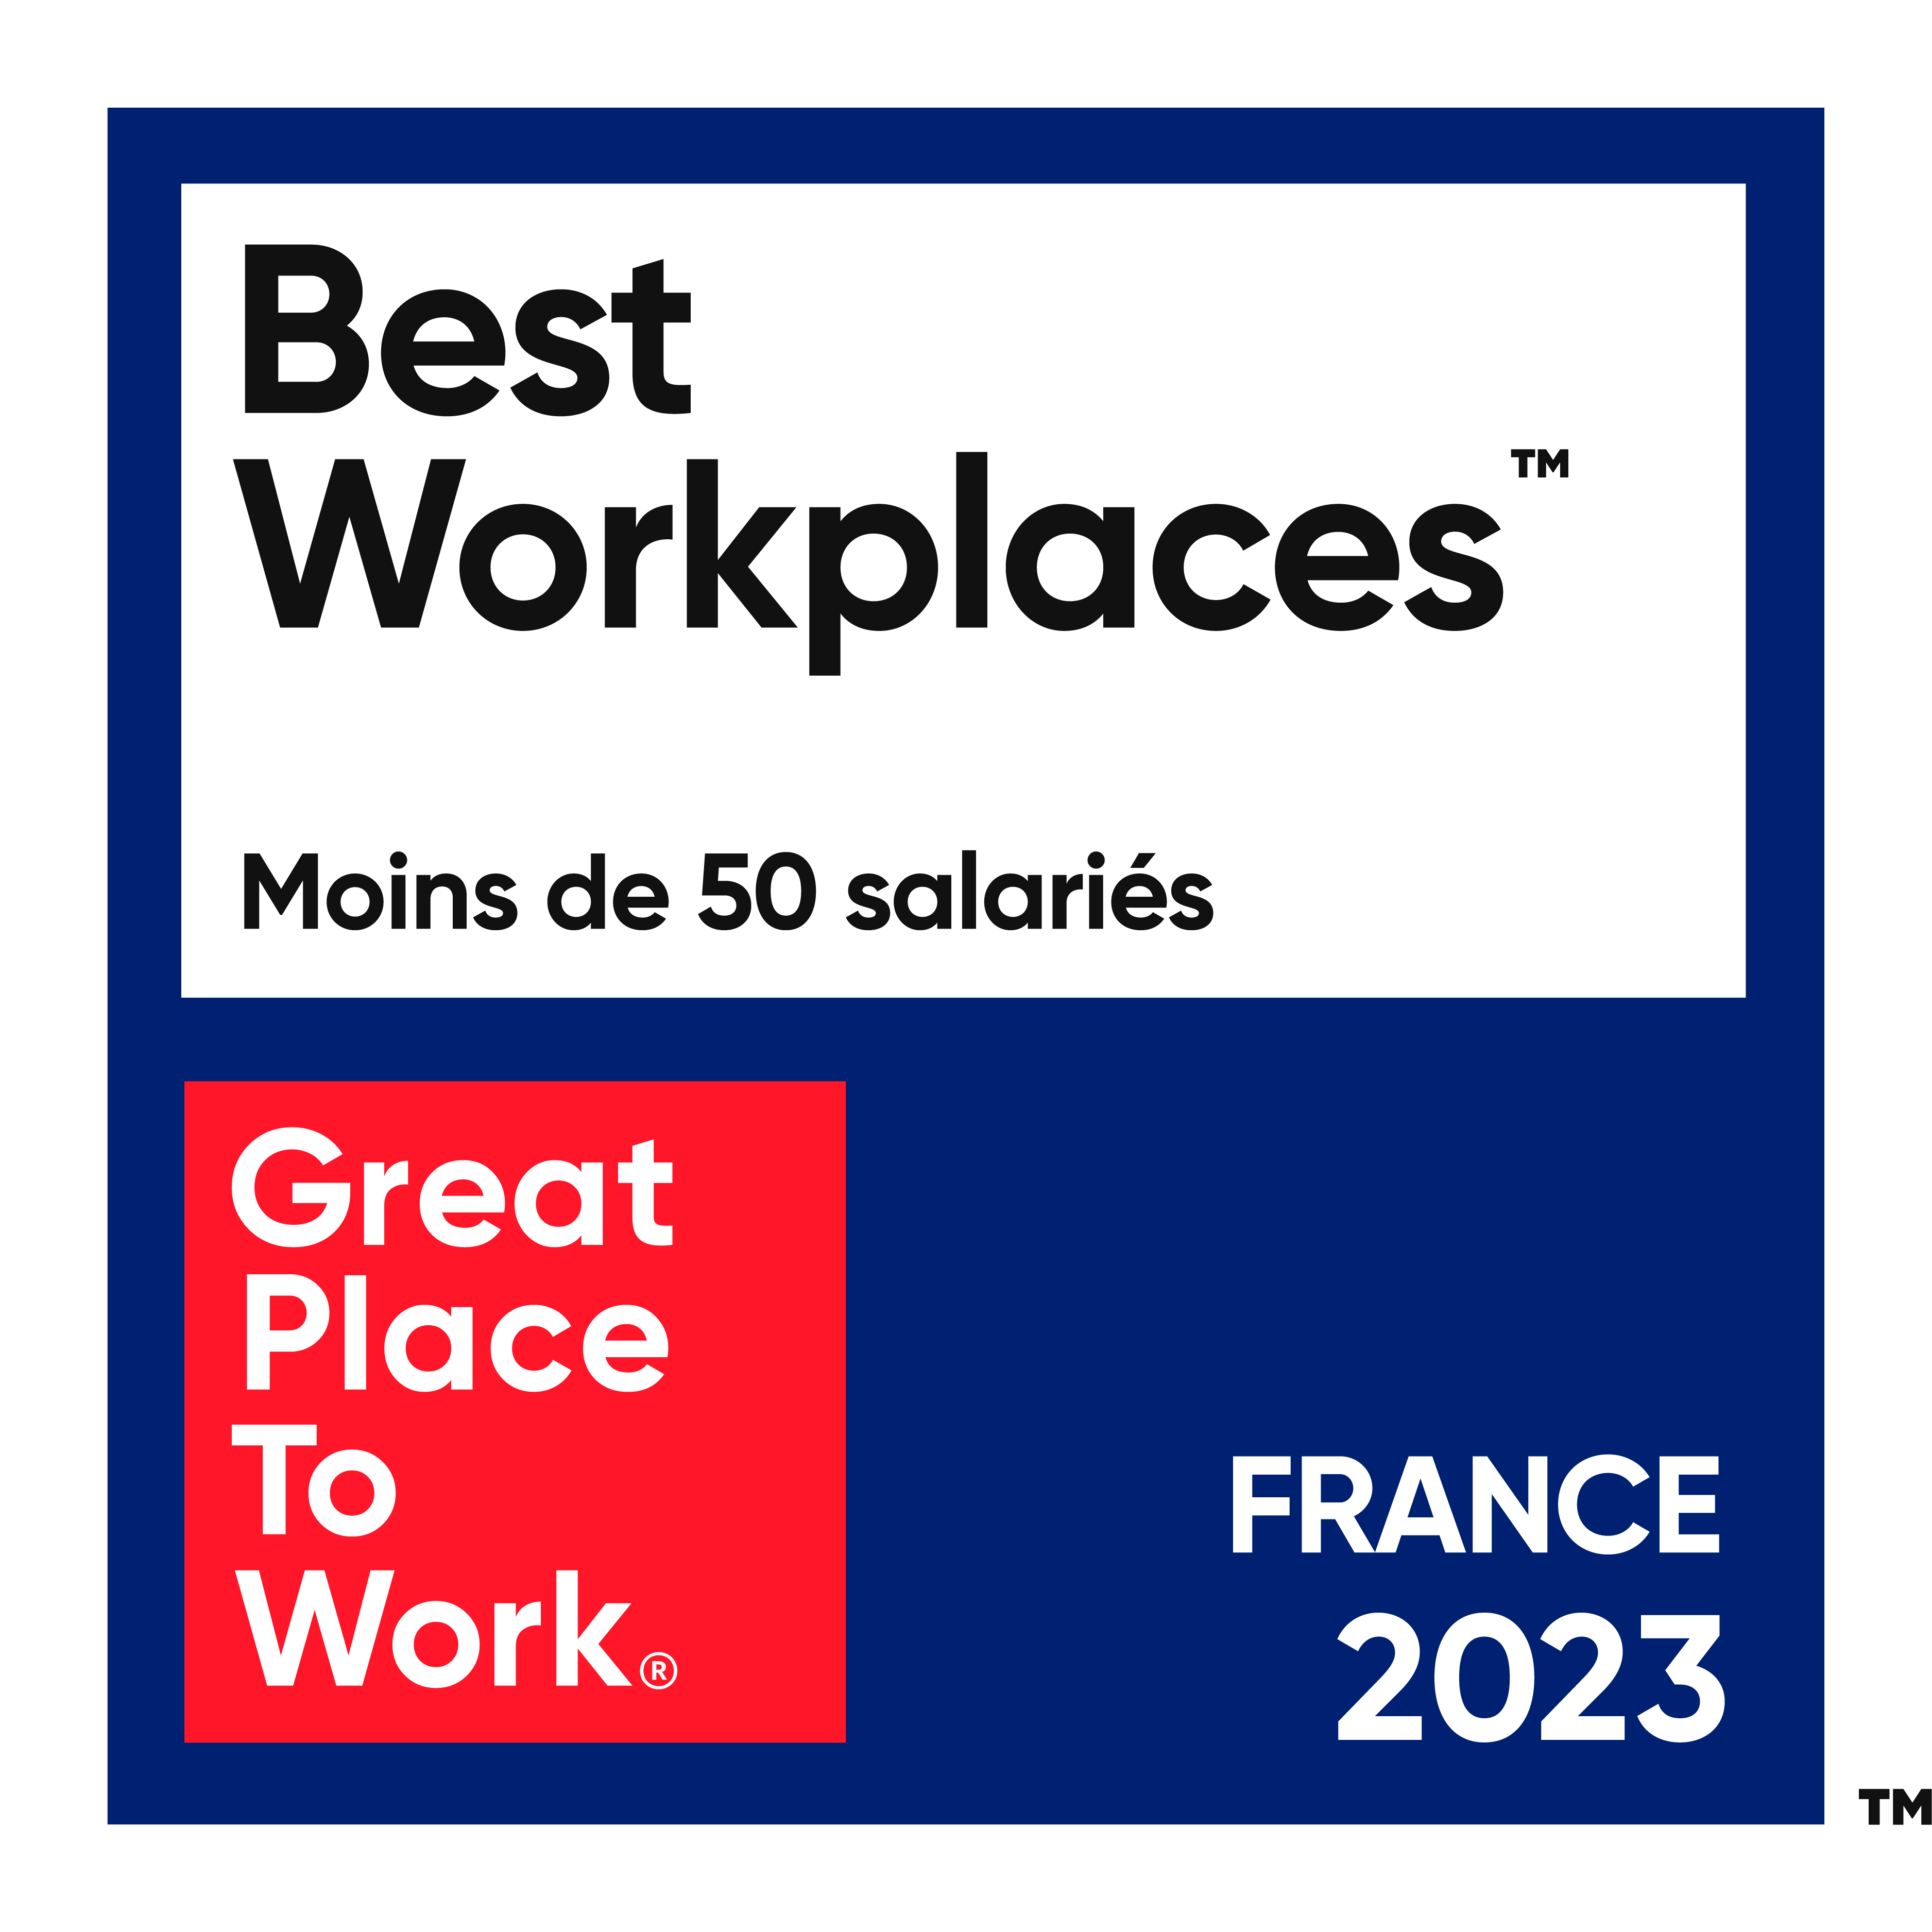 Best Workplaces - Great place to work France 2023